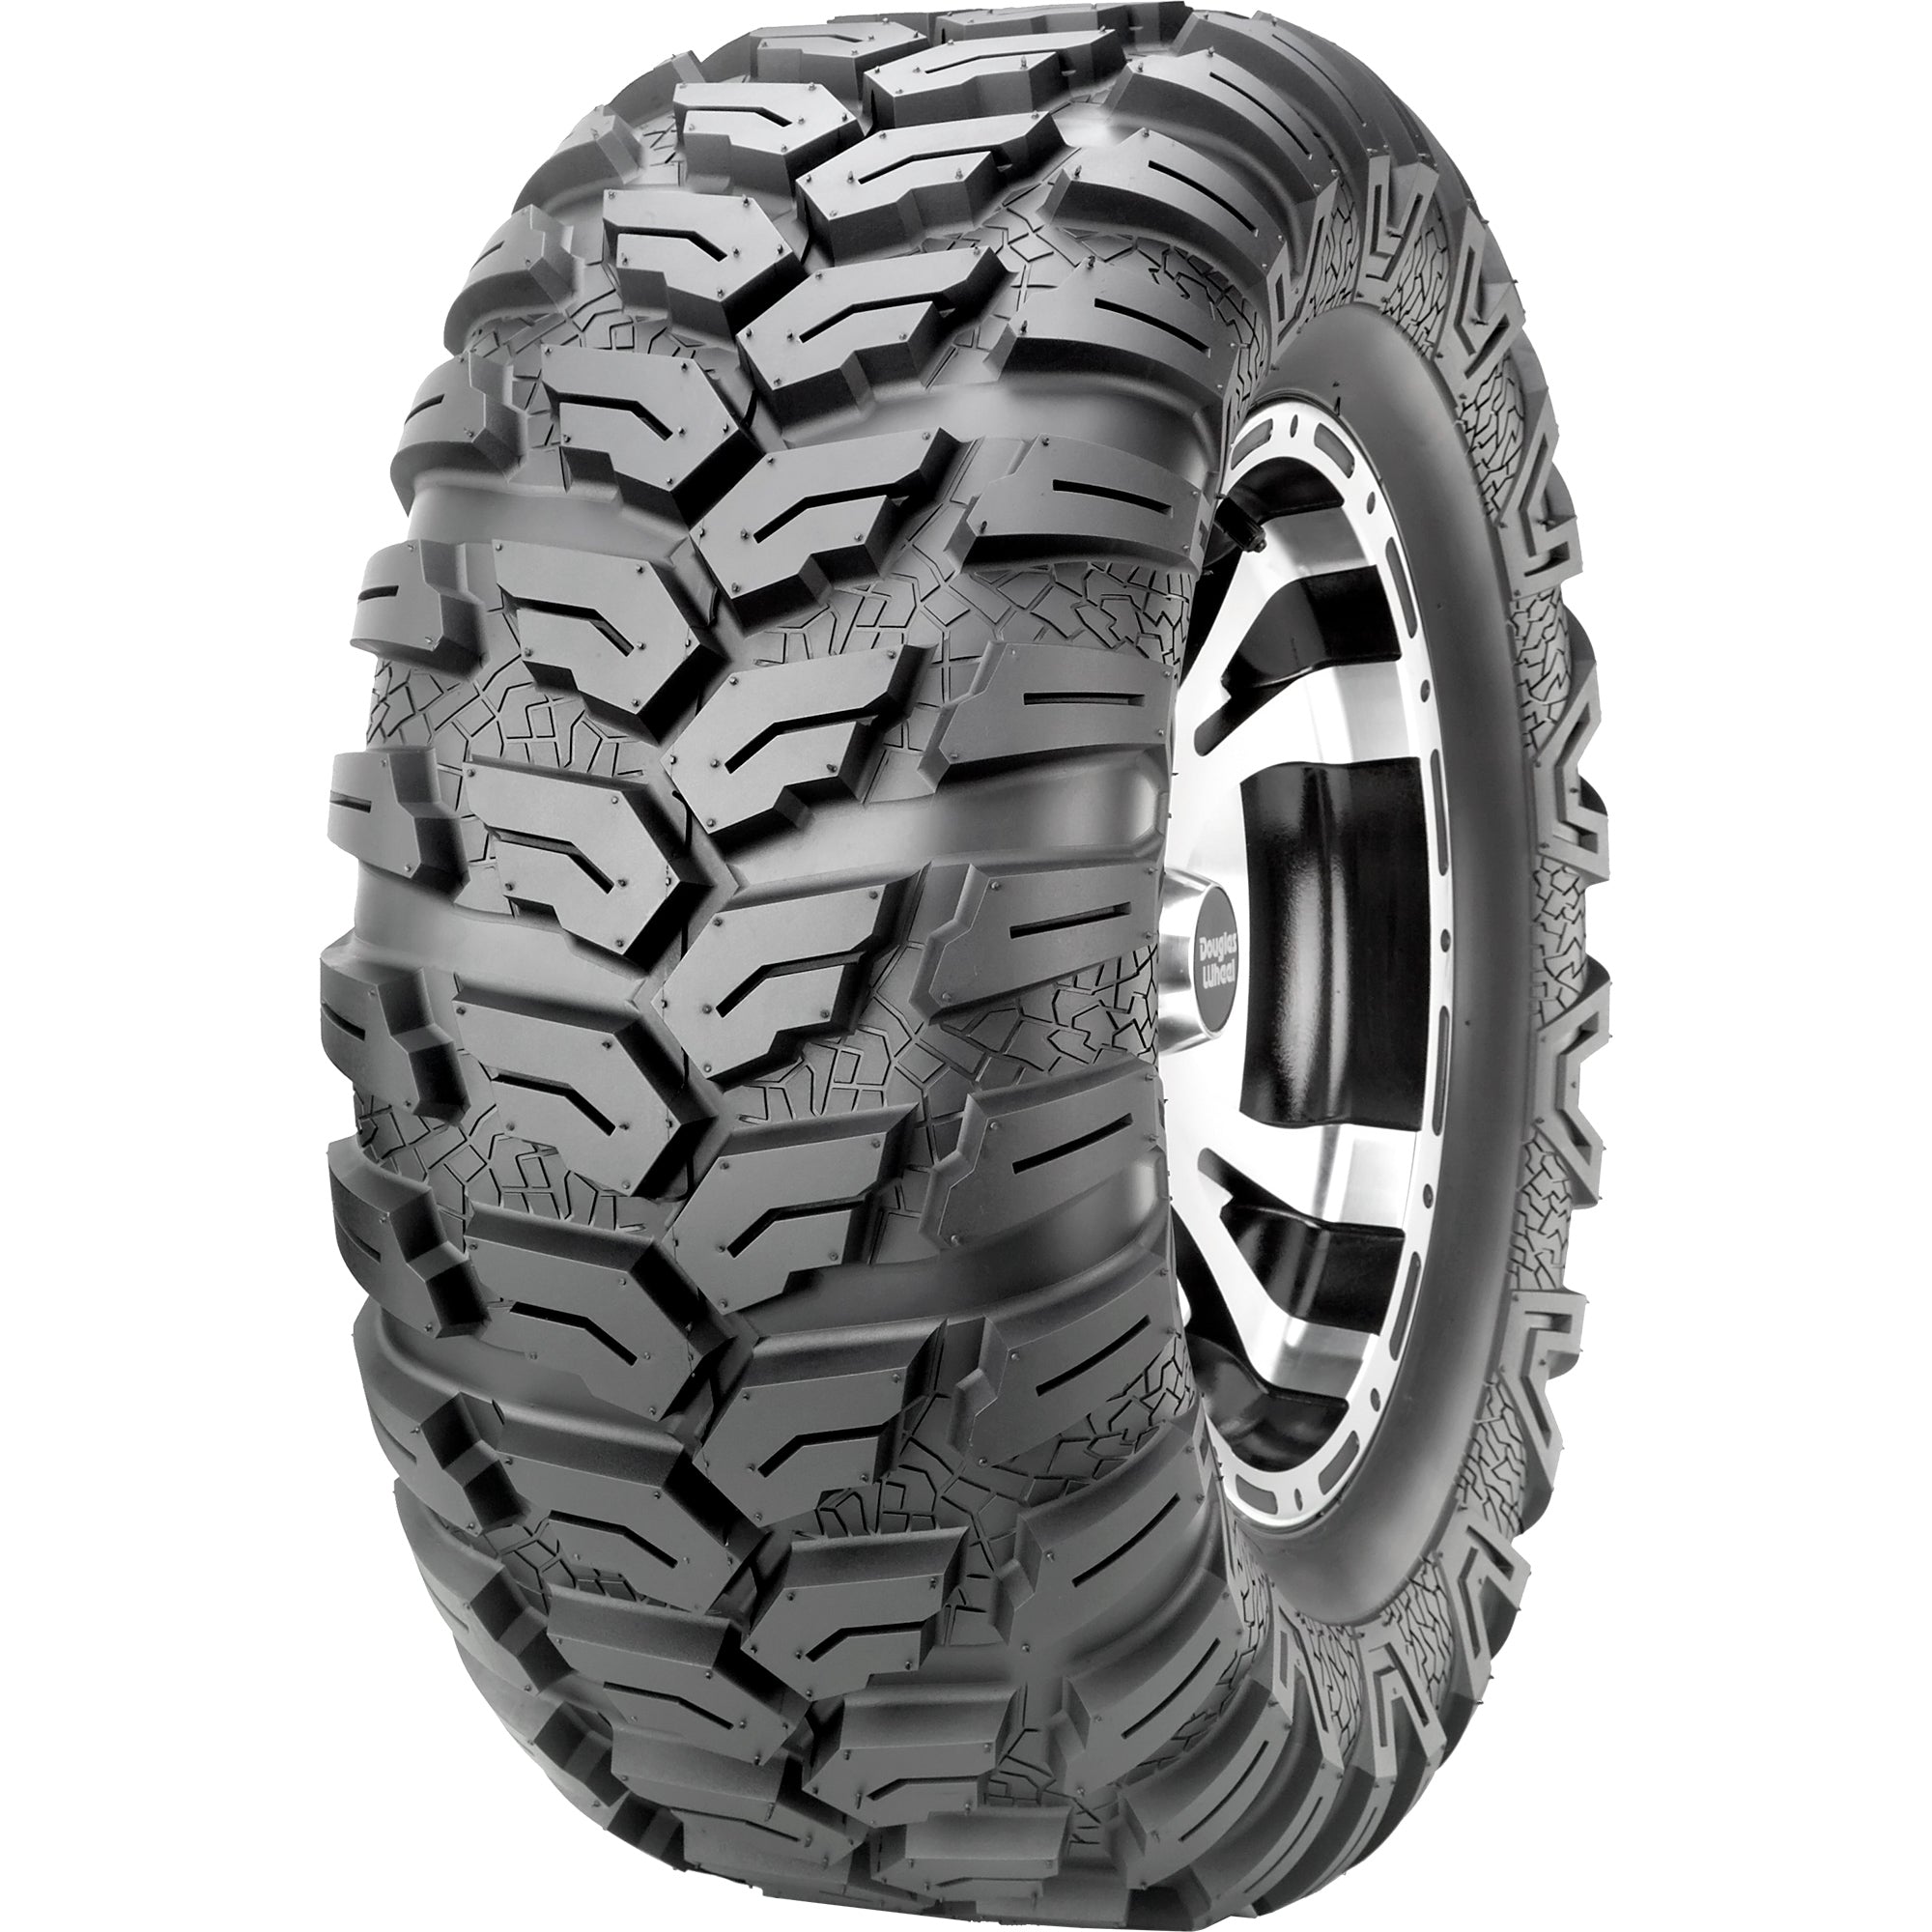 Maxxis TM00420100 Ceros Radial Tire 25x10-12 For Universal Fit